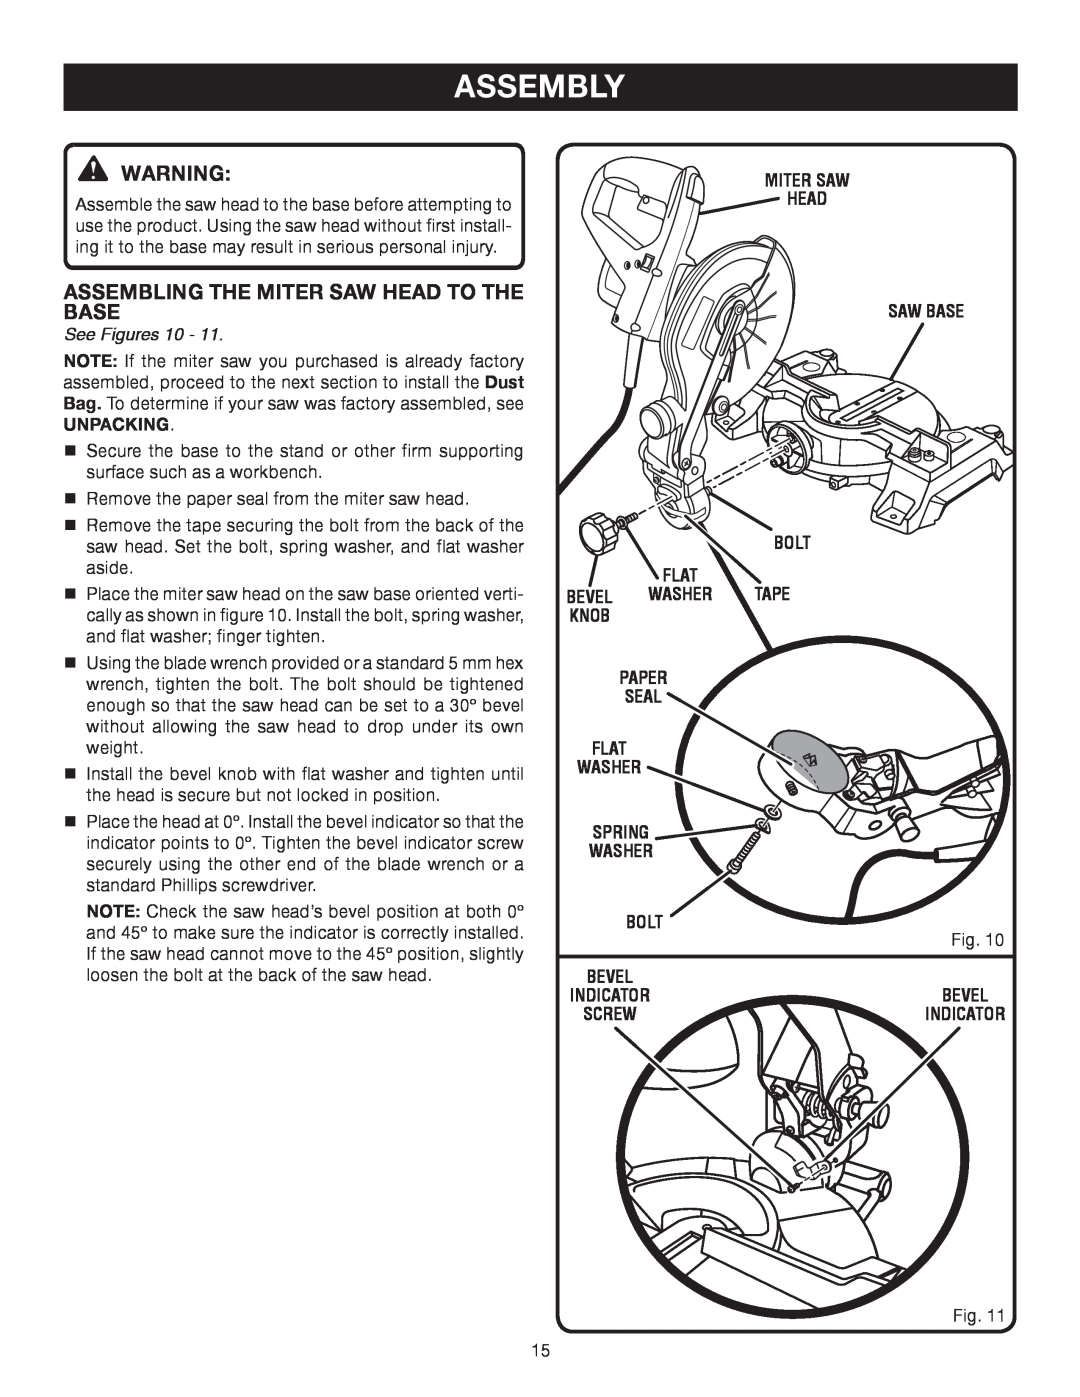 Ryobi TS1141 manual Assembly, assembling the miter saw head to the base, See Figures 10 